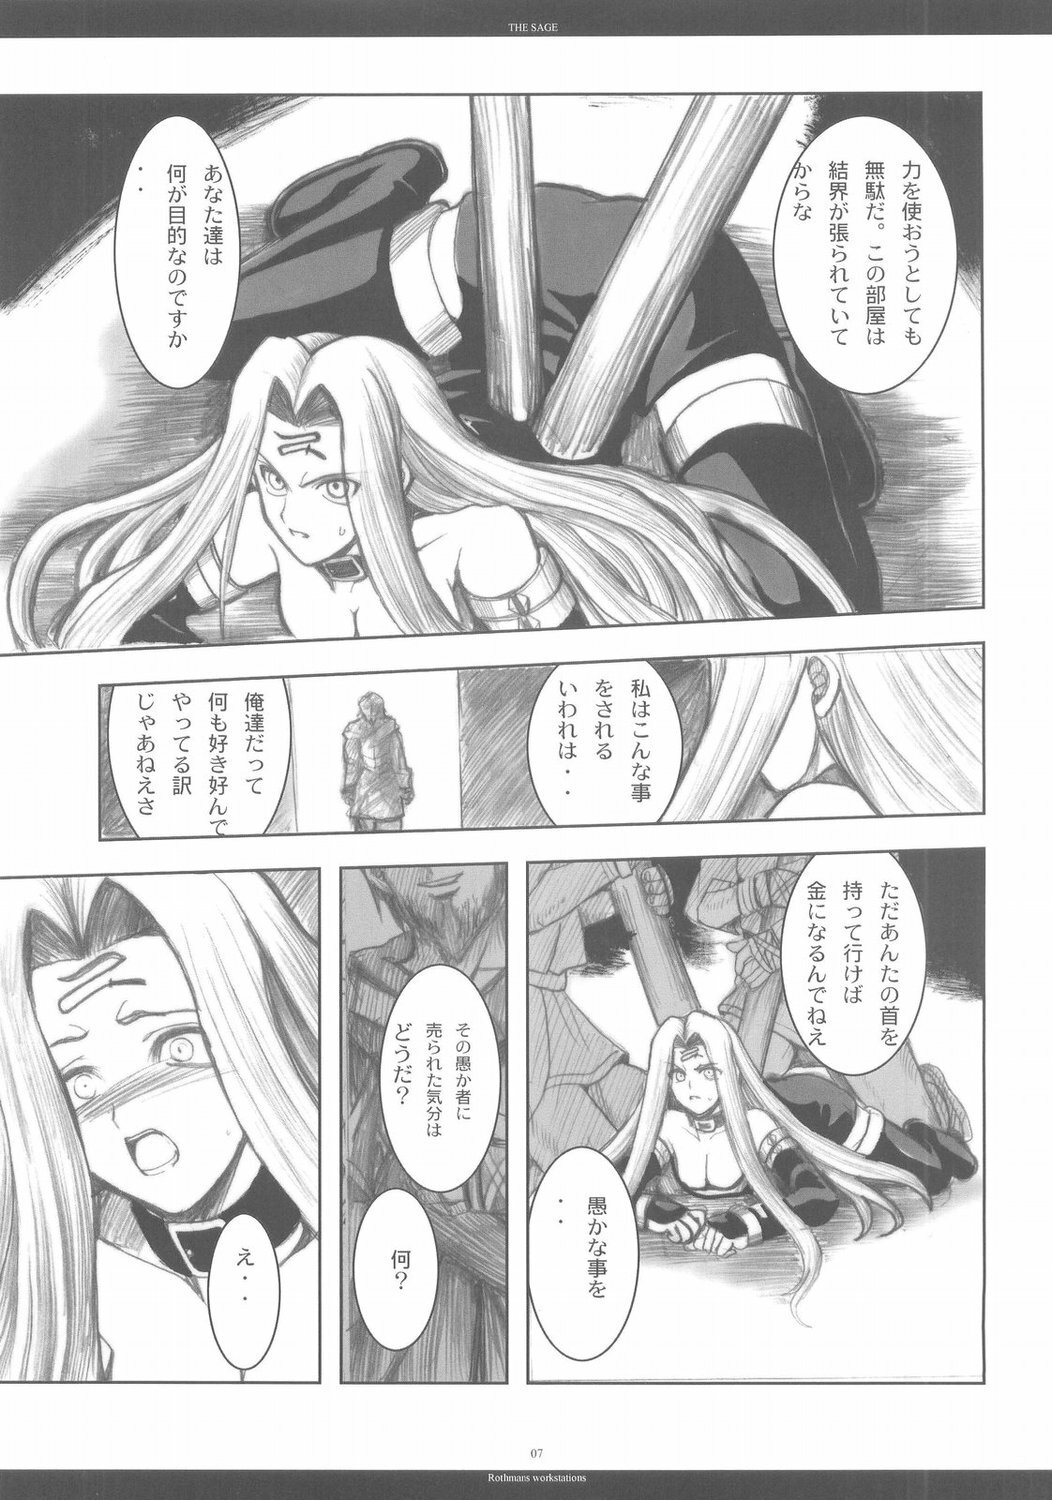 (CR37) [R-WORKS (ROS)] THE SAGE (Fate/stay night) page 6 full